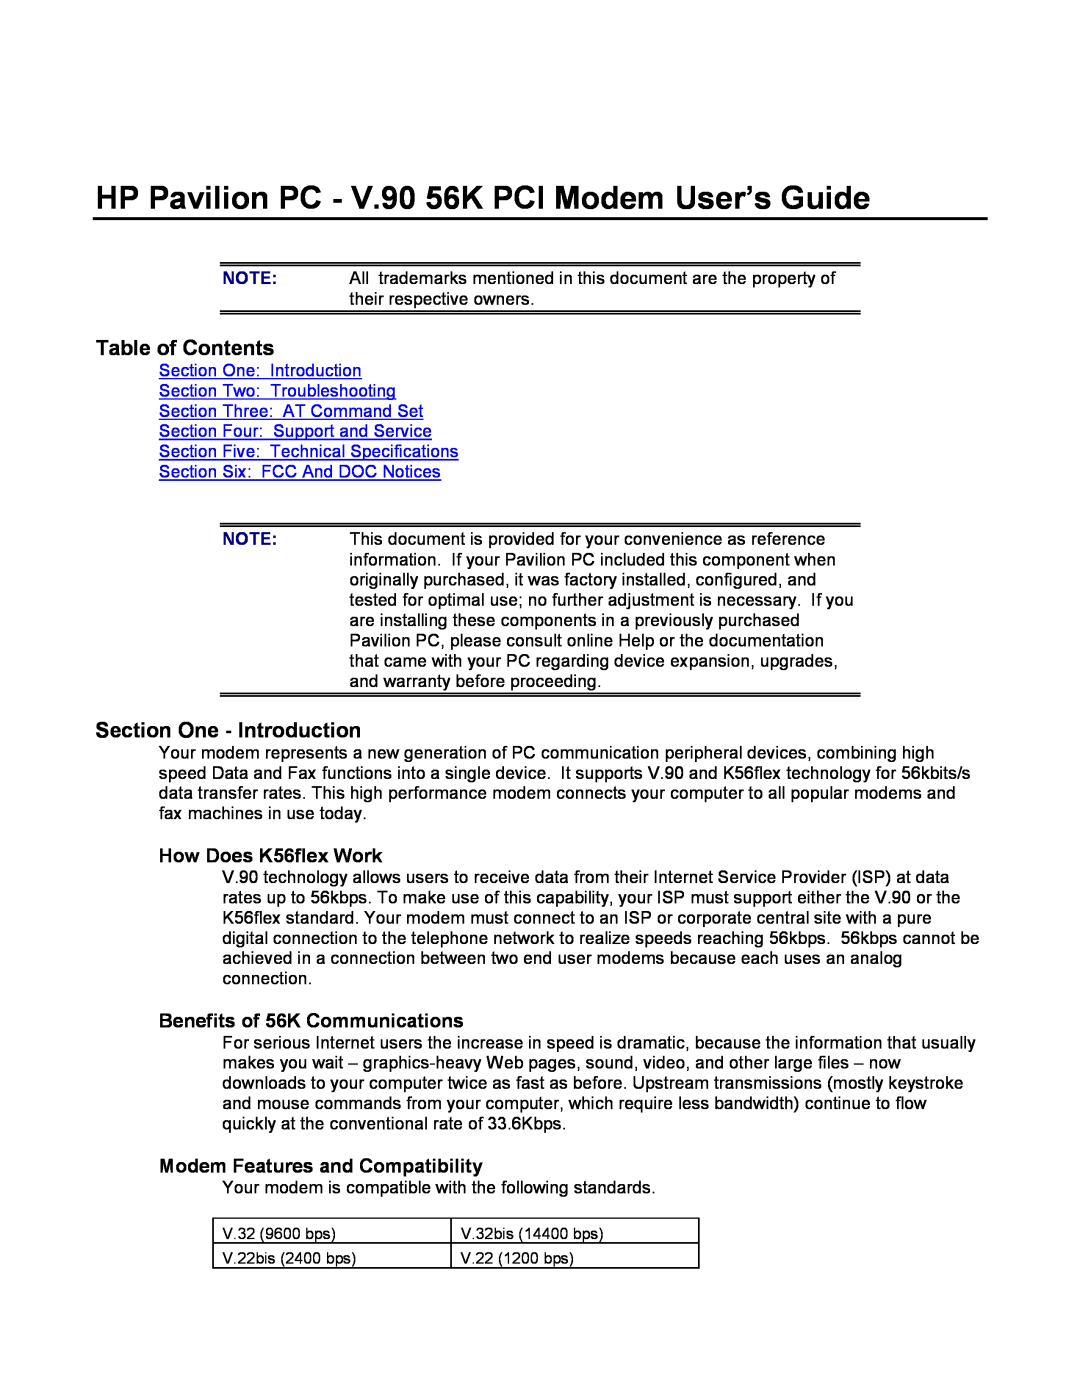 HP 7861 (LA) manual Table of Contents, Section One - Introduction, How Does K56flex Work, Benefits of 56K Communications 